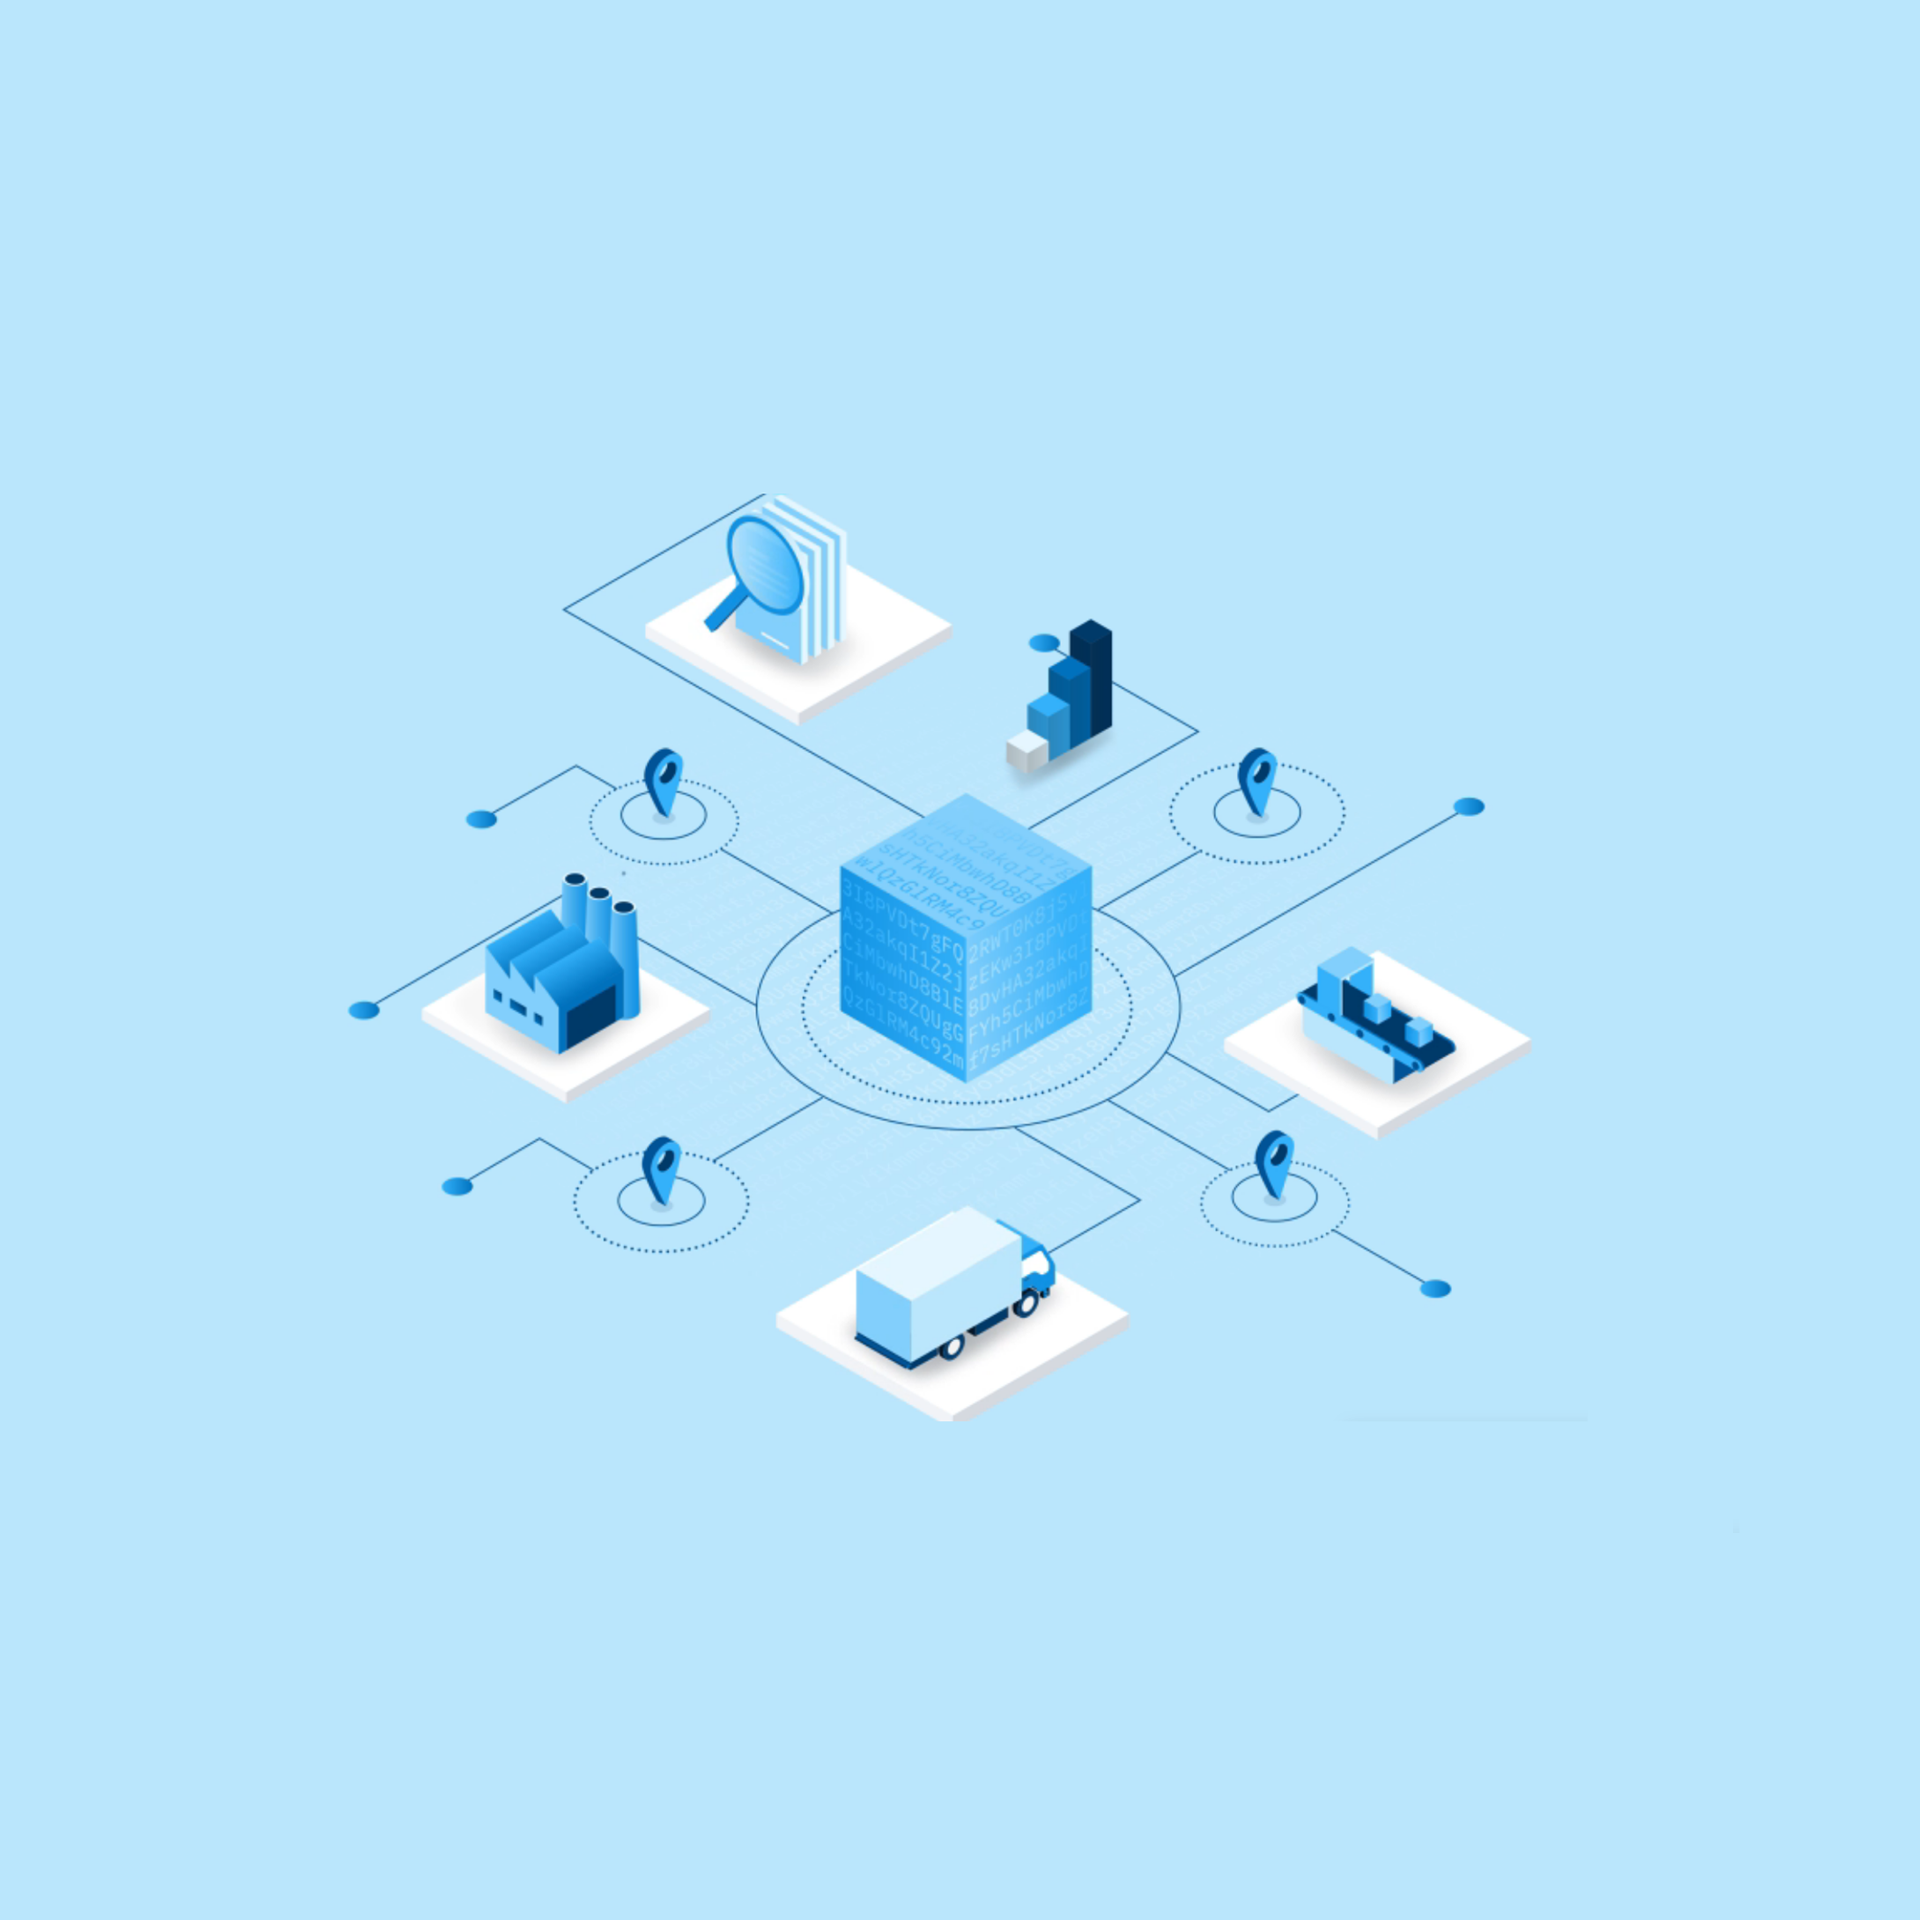 Isometric illustration of blue procurement icons displaying truck boat industry bar chart and magnifying glass